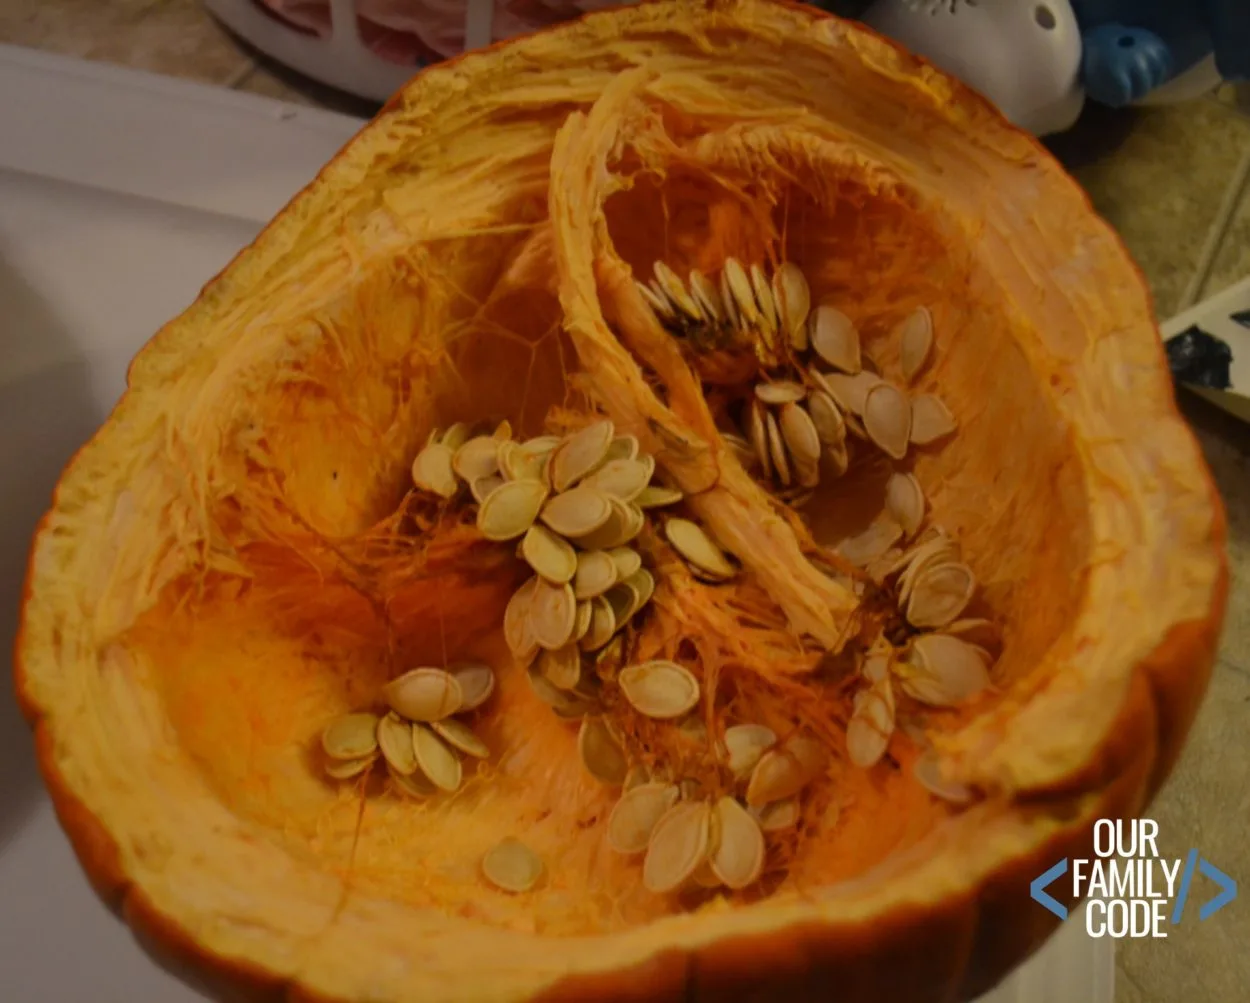 large pumpkin cut in half with lots of seeds